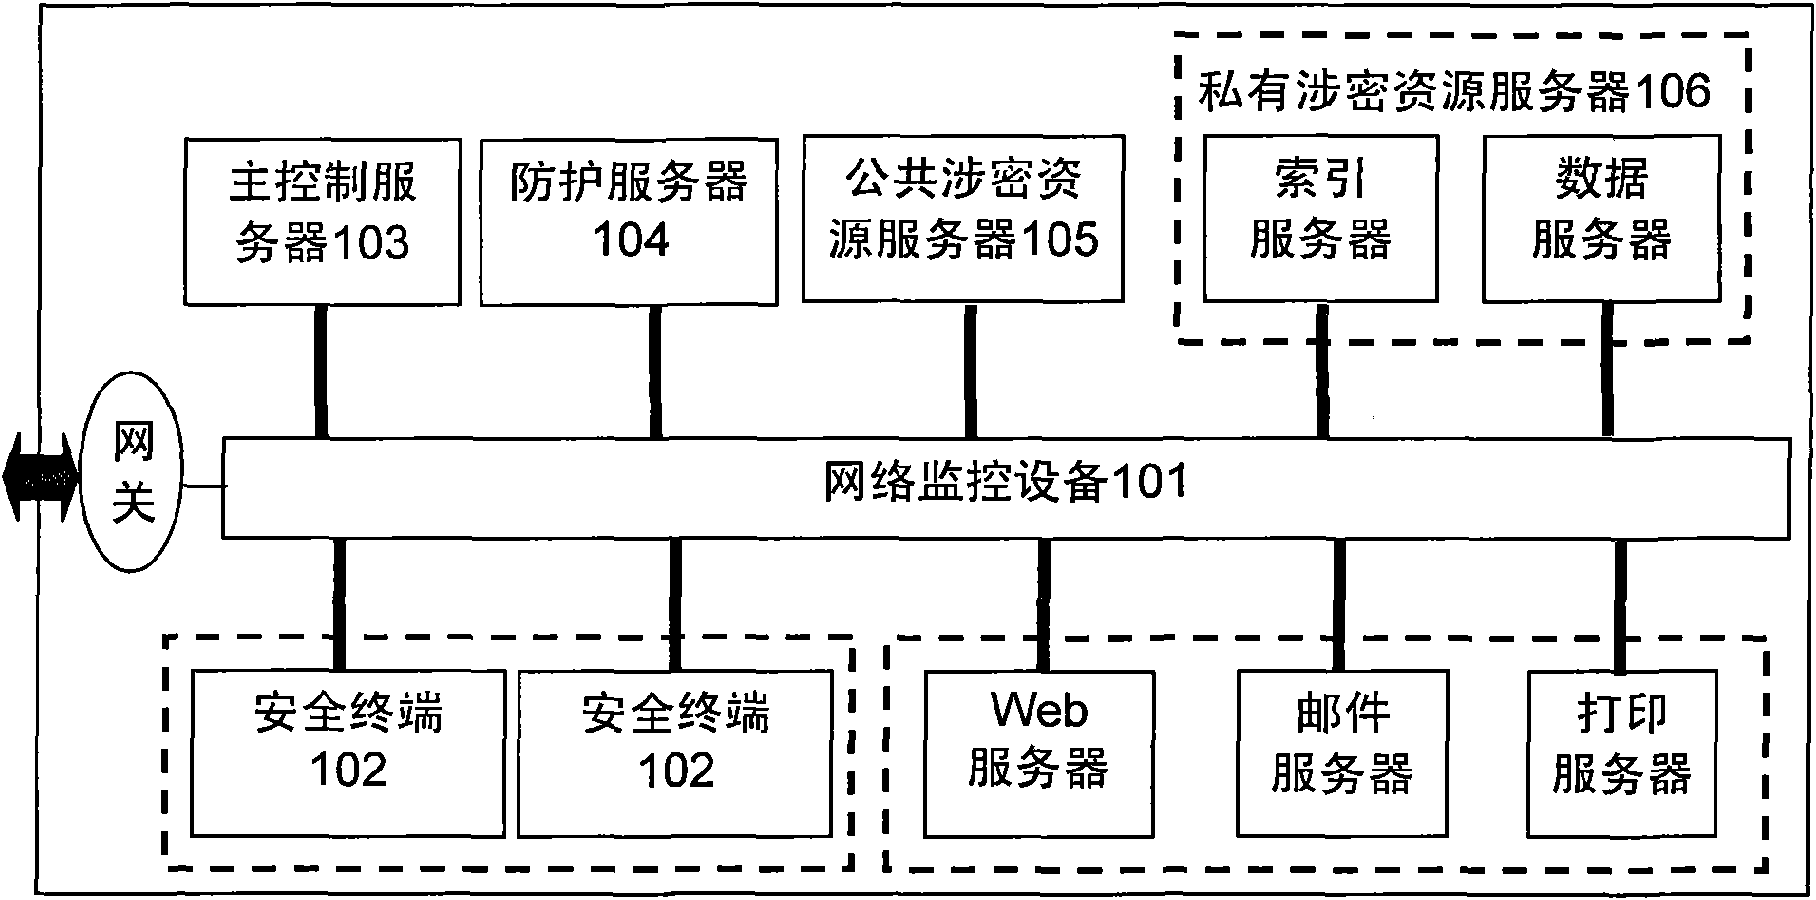 Local area network system and method for maintaining safety thereof